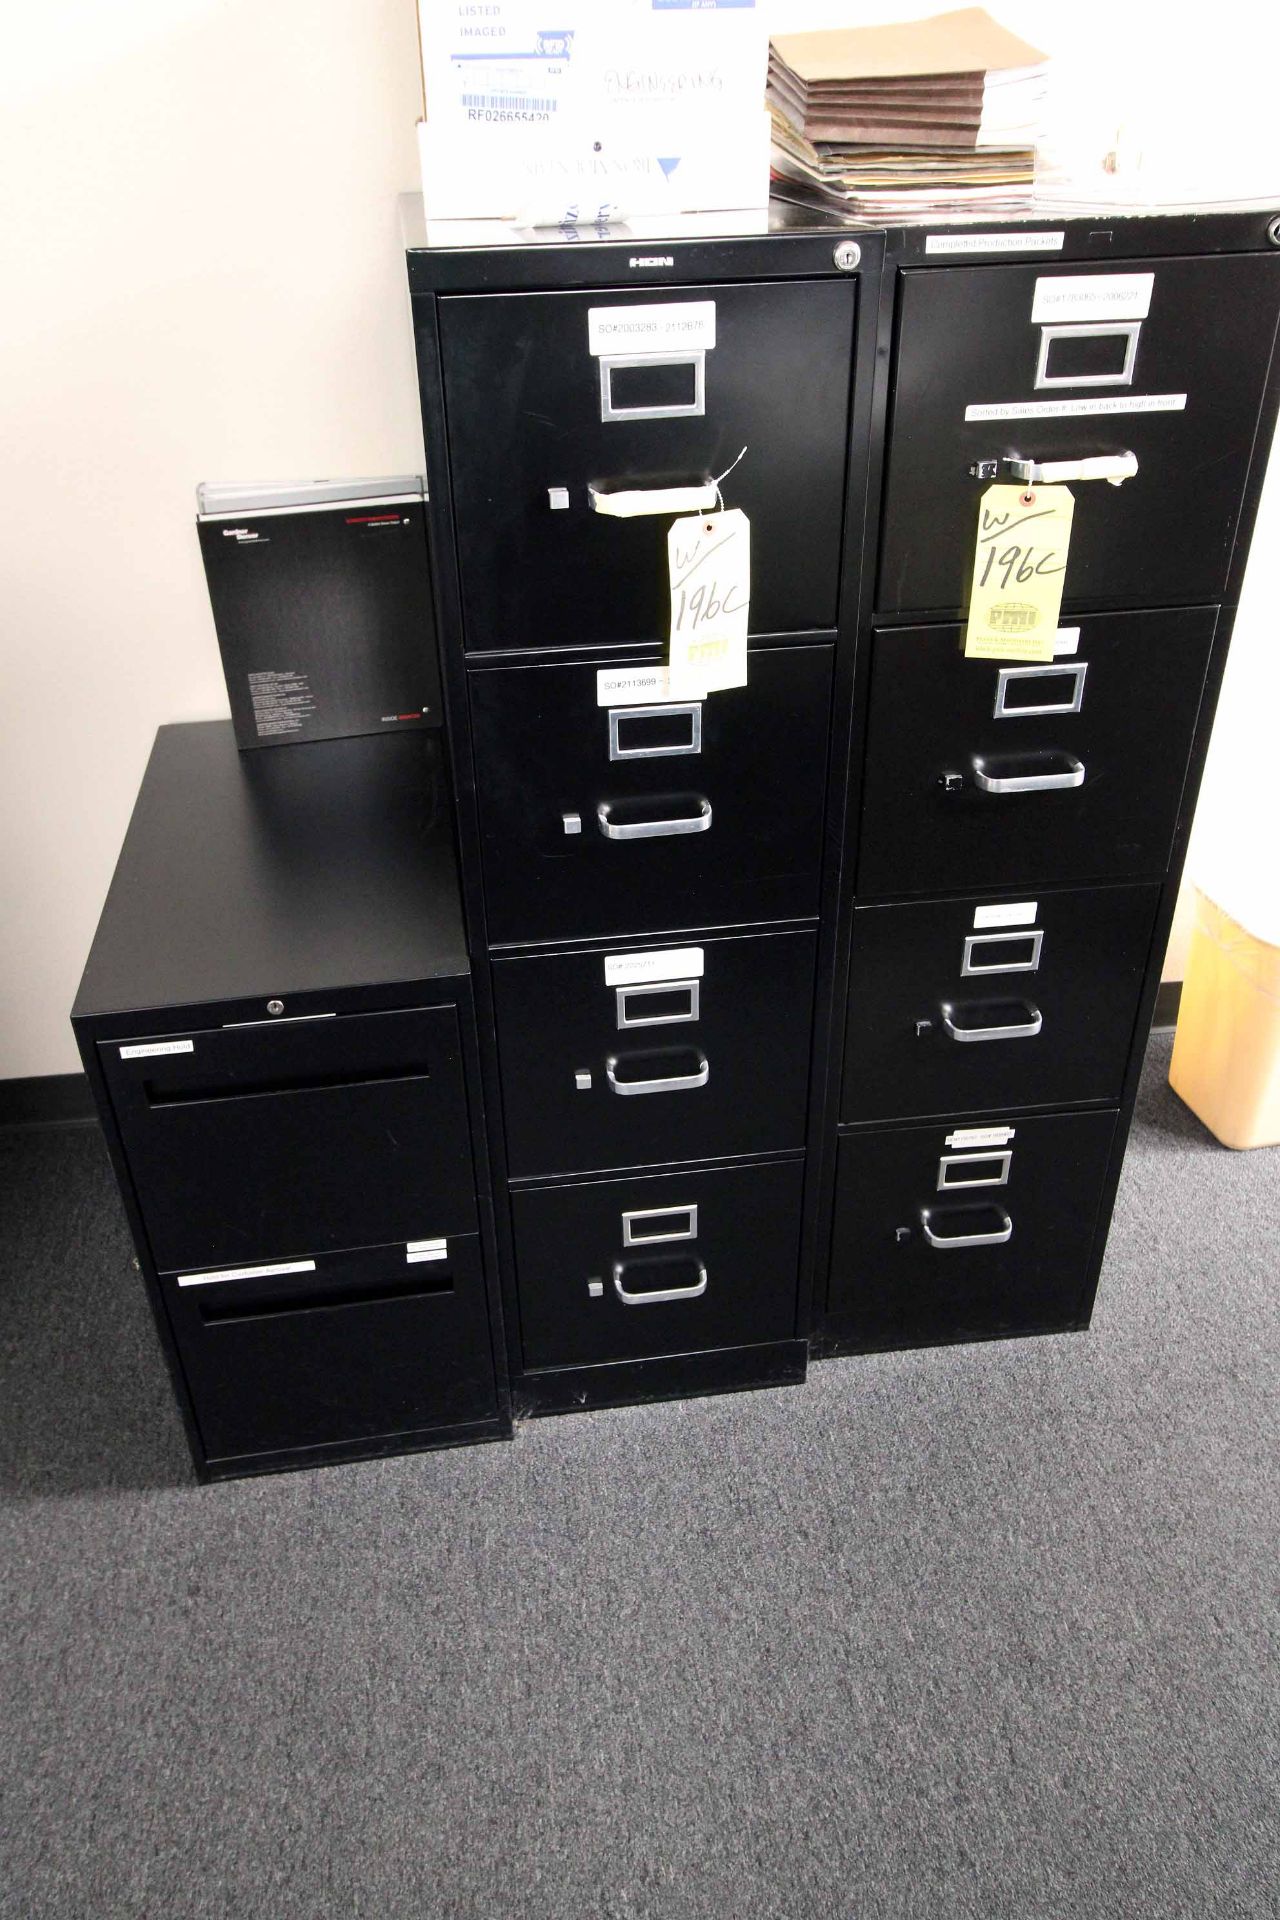 LOT CONSISTING OF: (2) 4-drawer vertical file cabinets & (1) 2-door cabinet, 18" x 36" x 72" ( - Image 3 of 3